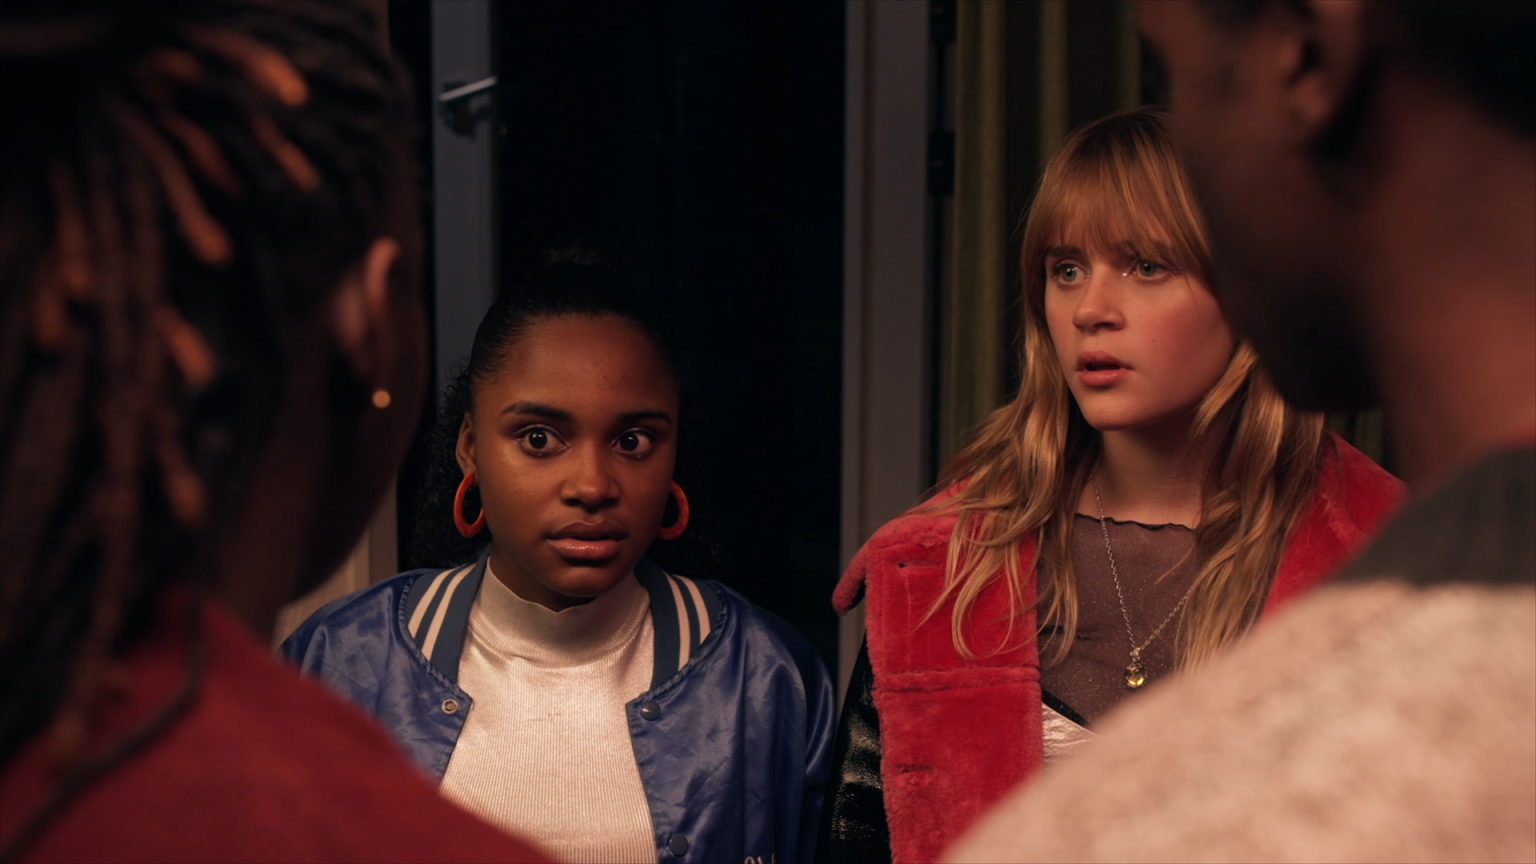 Still from 'Gedrogeerde Ouders?', episode 6 of Broodje Aap. It is an over the shoulder shot of two teenaged girls, one Black and one white, in hip 'going out' clothing. They are looking shocked at the two people we are looking over the shoulder from; two Black adults.